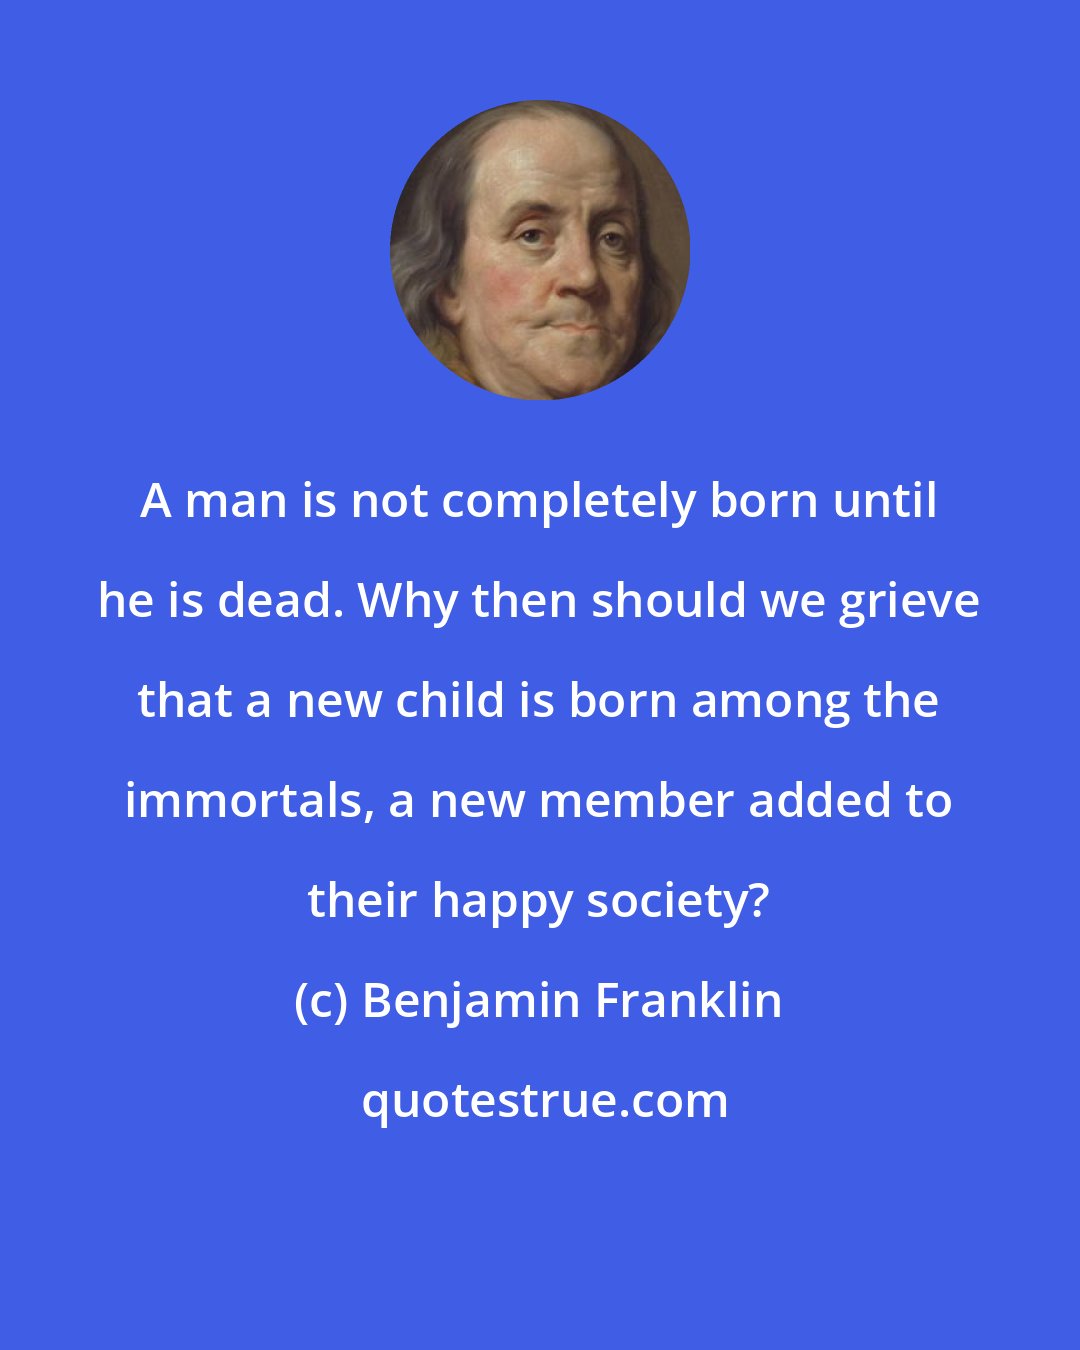 Benjamin Franklin: A man is not completely born until he is dead. Why then should we grieve that a new child is born among the immortals, a new member added to their happy society?